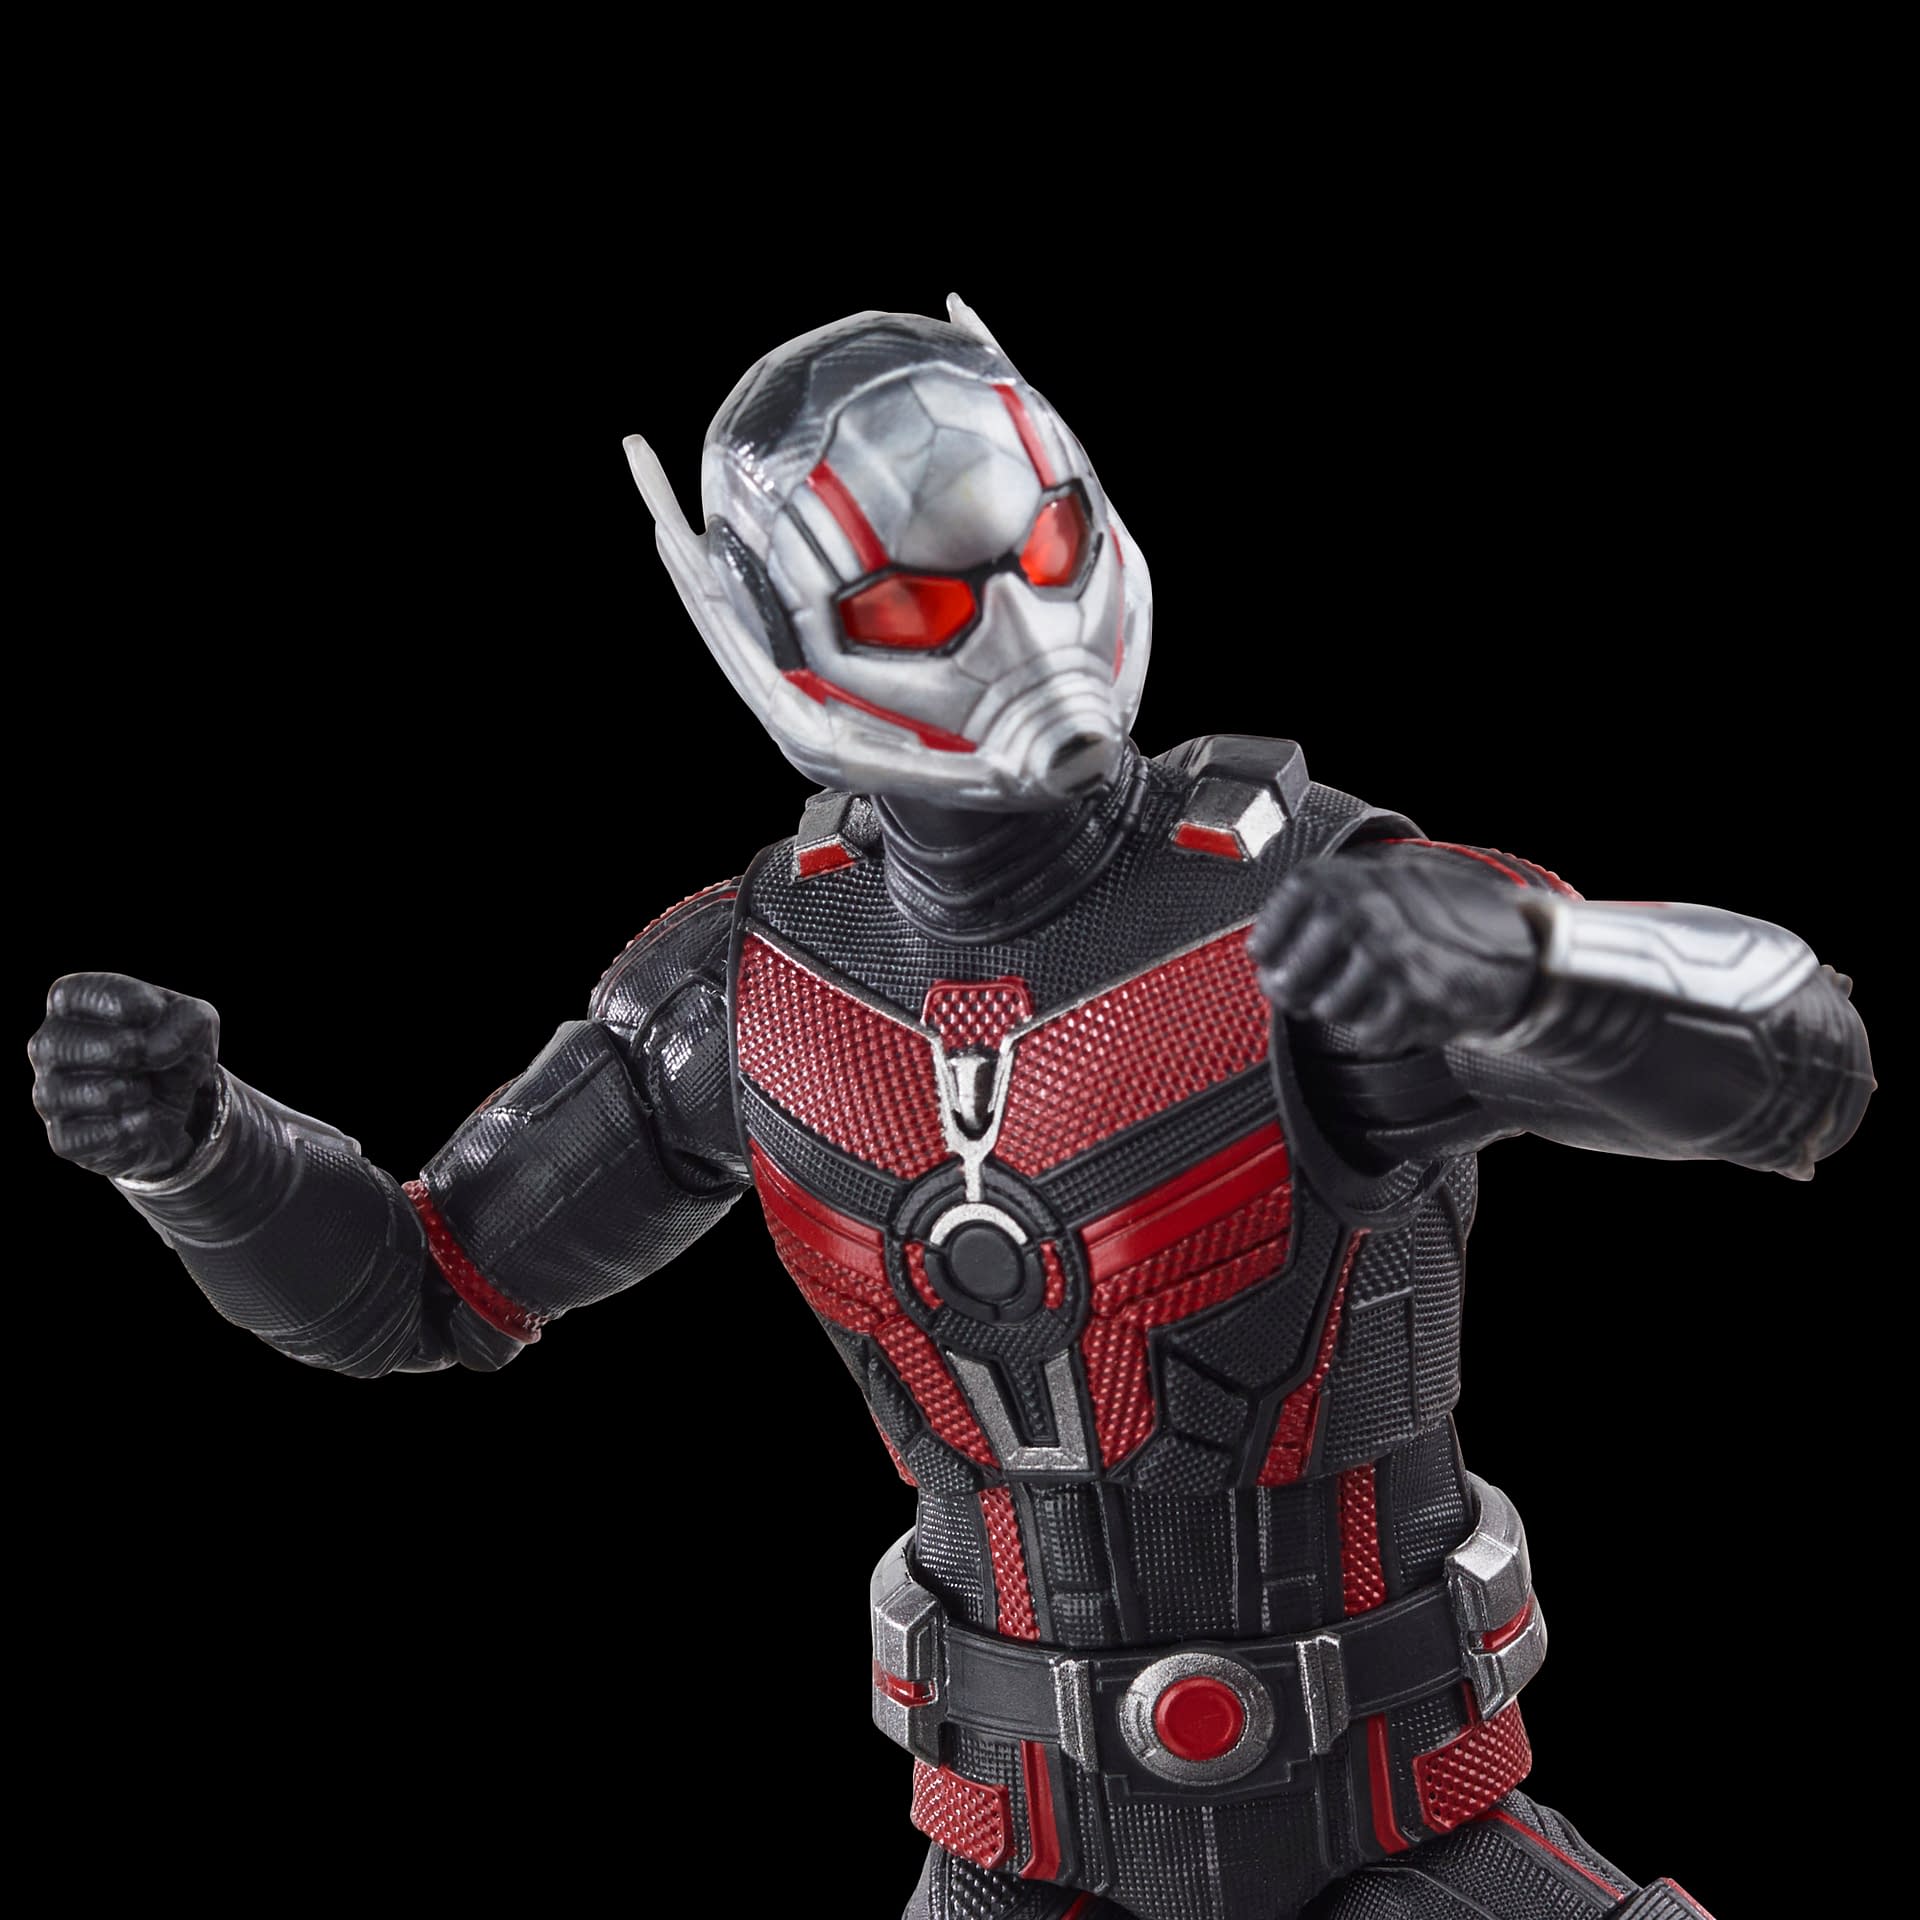 Ant-Man Prepares for Some Quantumania with Hasbro's Marvel Legends 